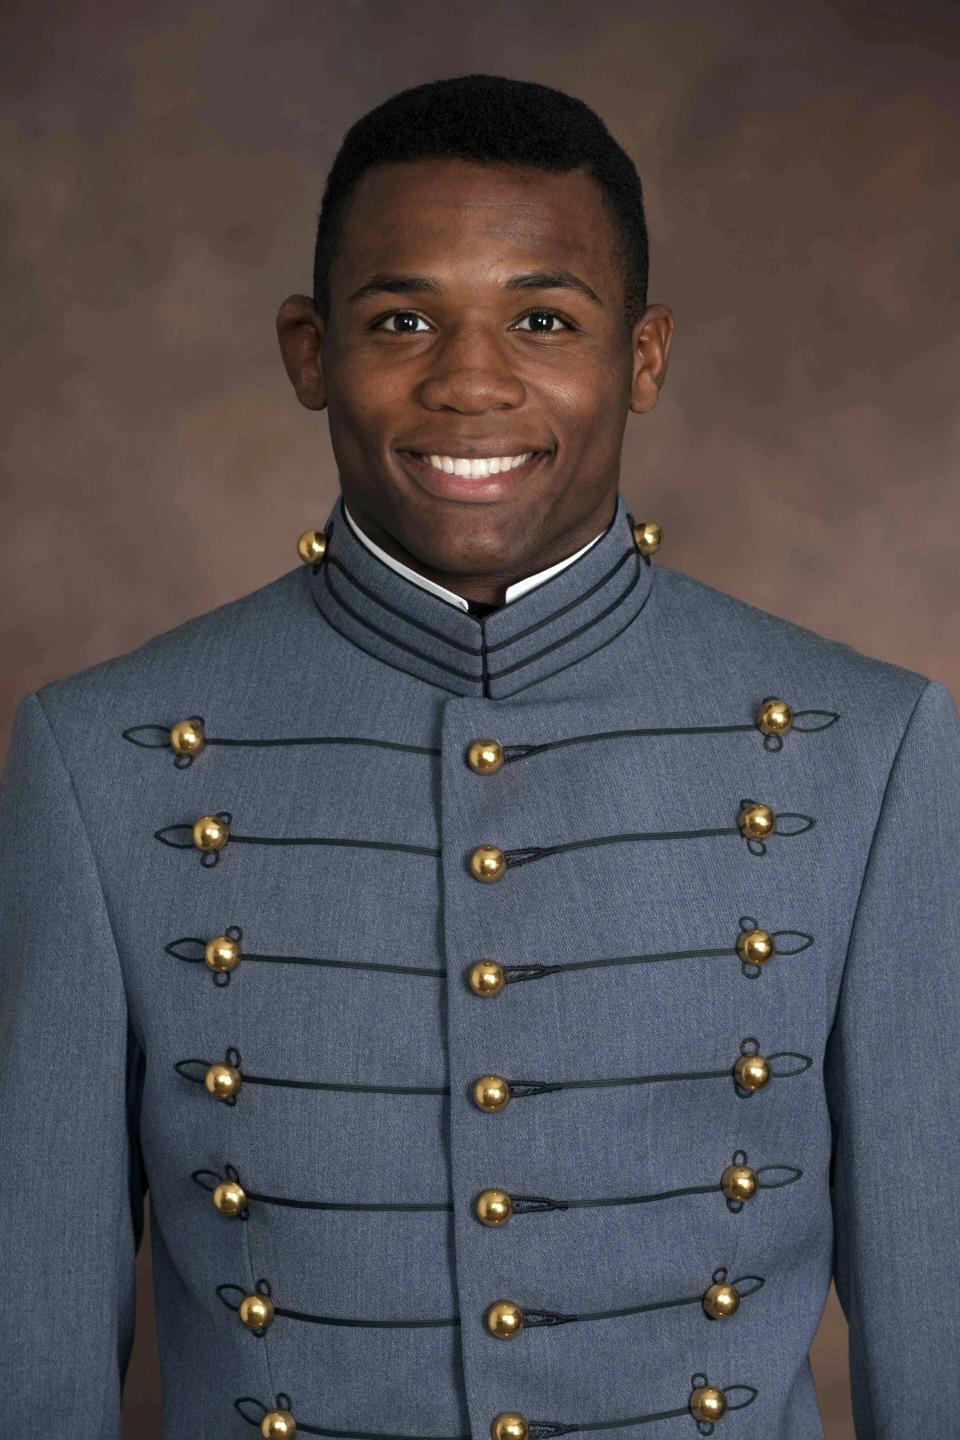 This undated photo provided by the U.S. Military Academy West Point shows Cadet Christopher J. Morgan, Class of 2020, from West Orange, NJ, who died Thursday June 6, 2019 when a vehicle loaded with West Point cadets on summer training overturned in rough, wooded terrain. (U.S. Military Academy West Point via AP)